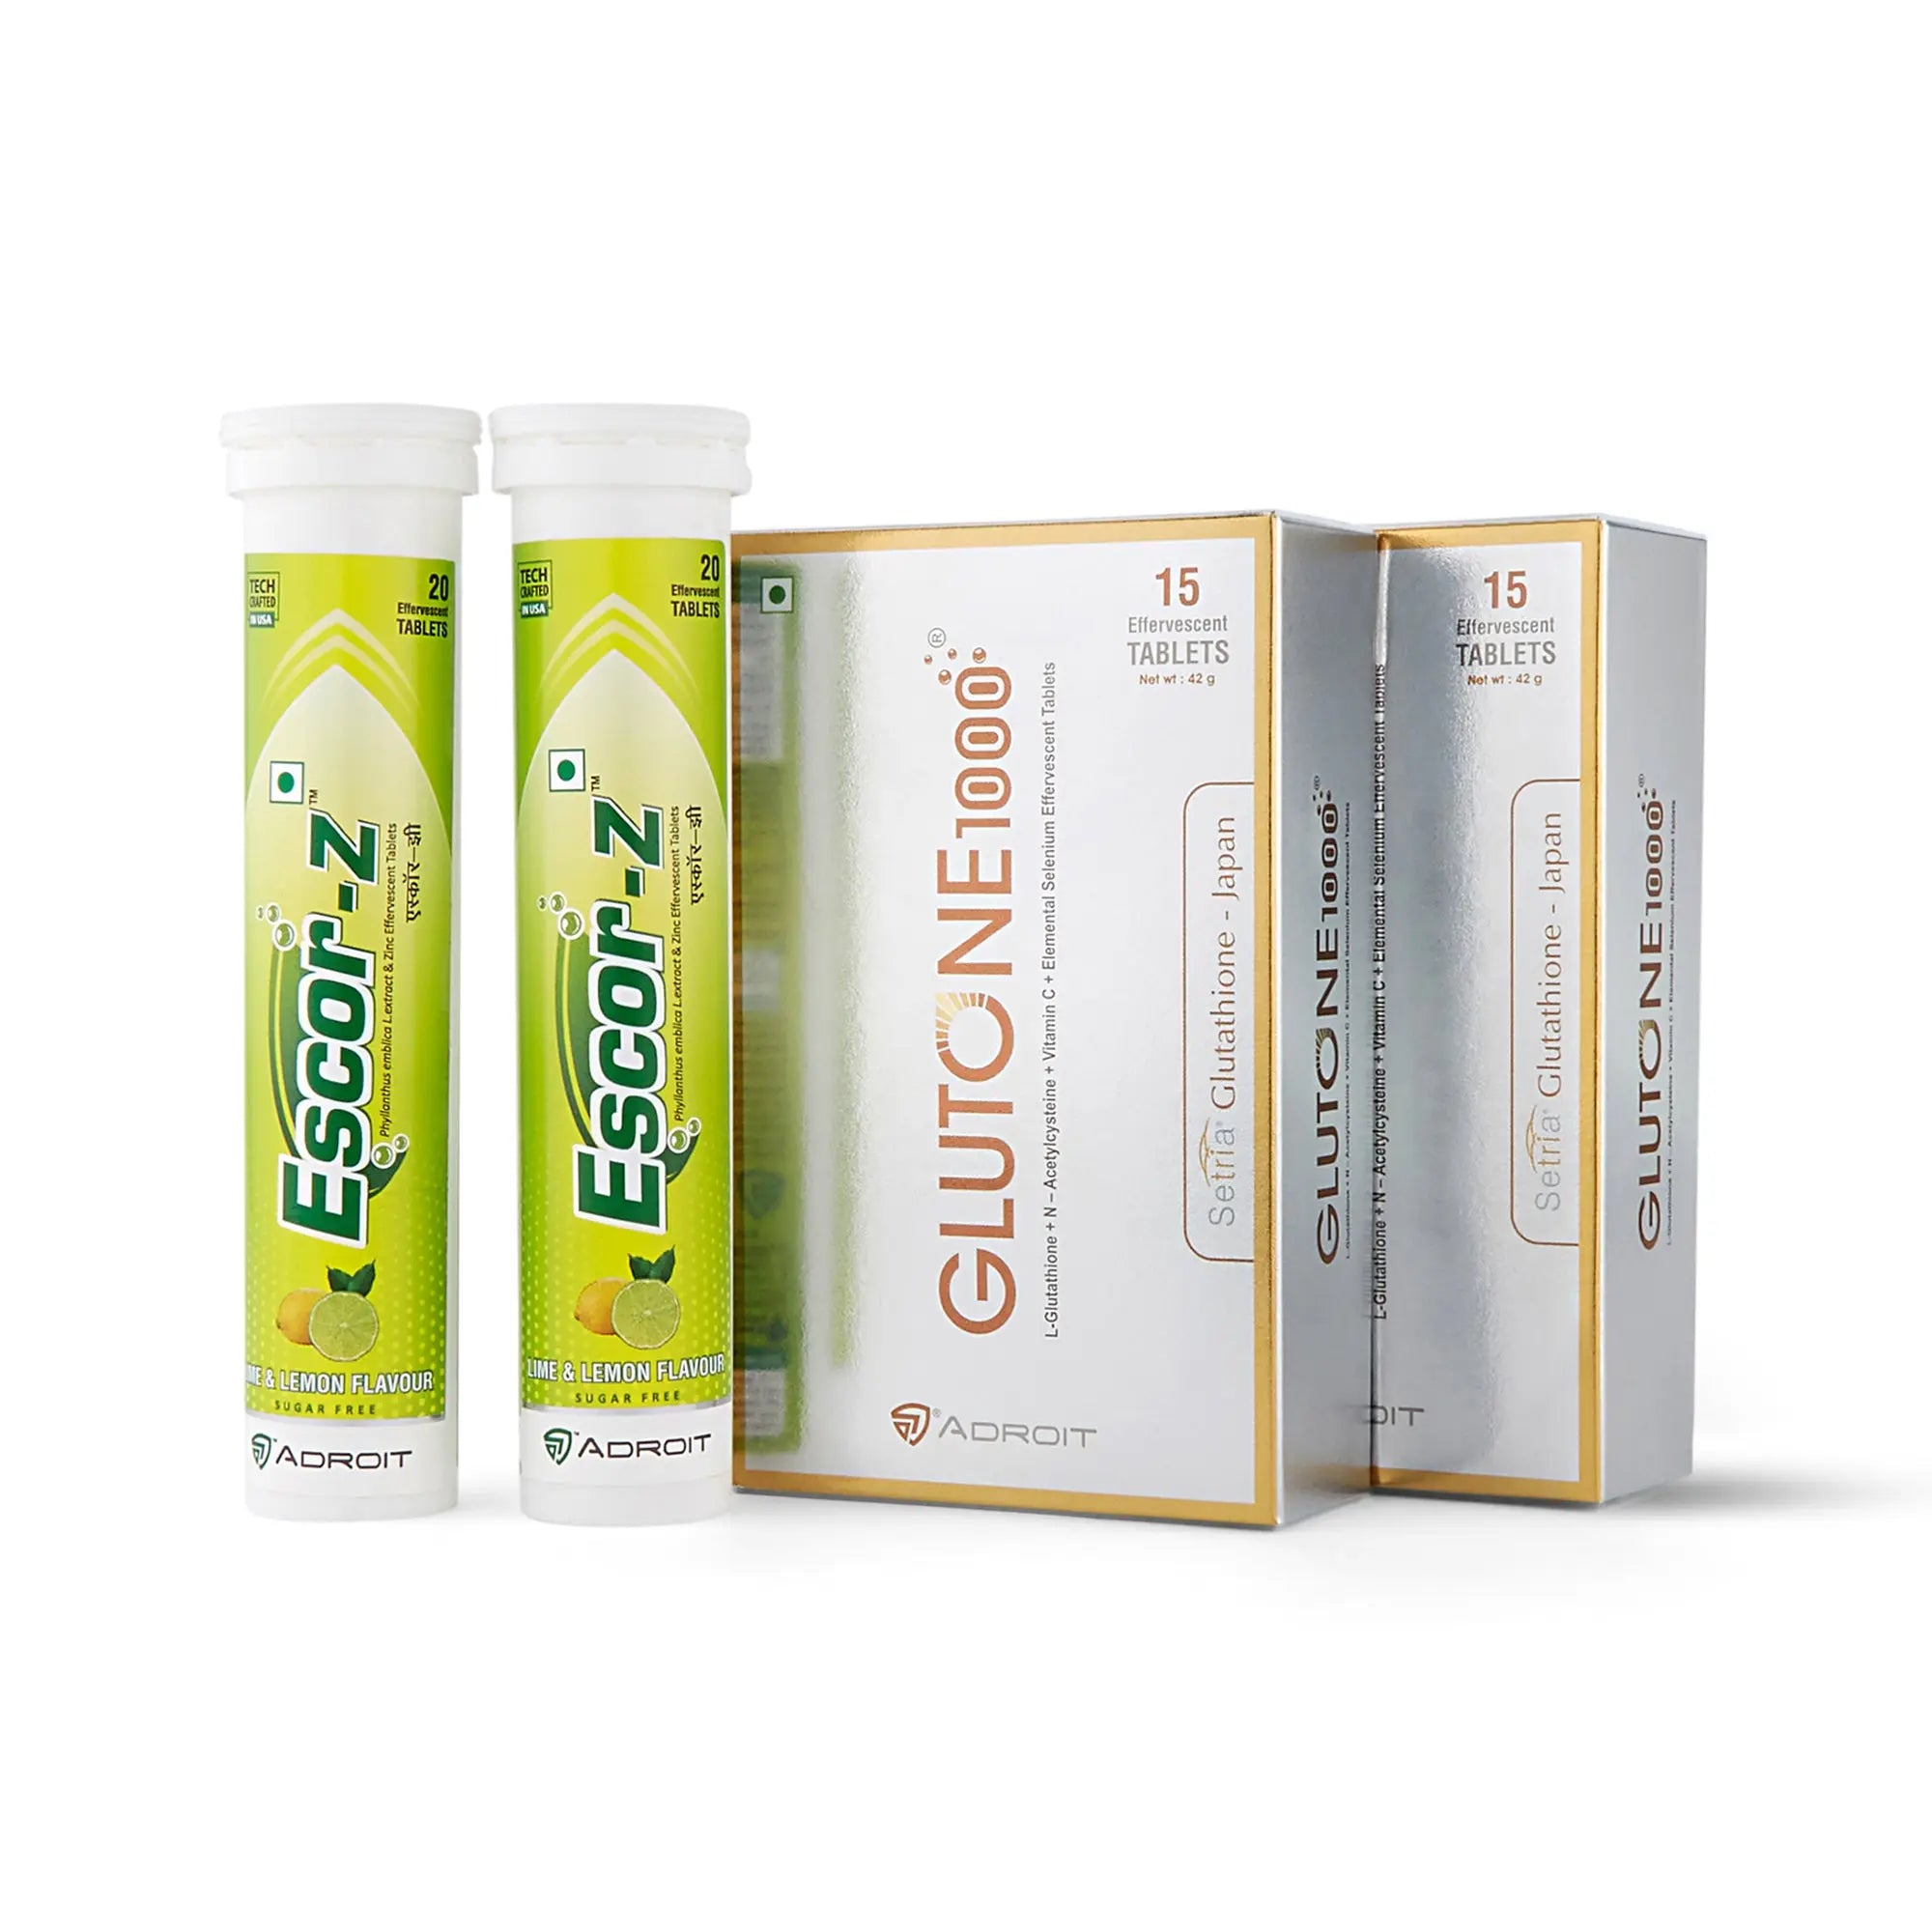 Glutone 1000 Effervescent Tablets and Escor-Z Natural Vitamin C Tablets Lime & Lemon Flavour (Pack of 2+2) | Setria Glutathione | Skin Glow and Radiance | Beauty from Within